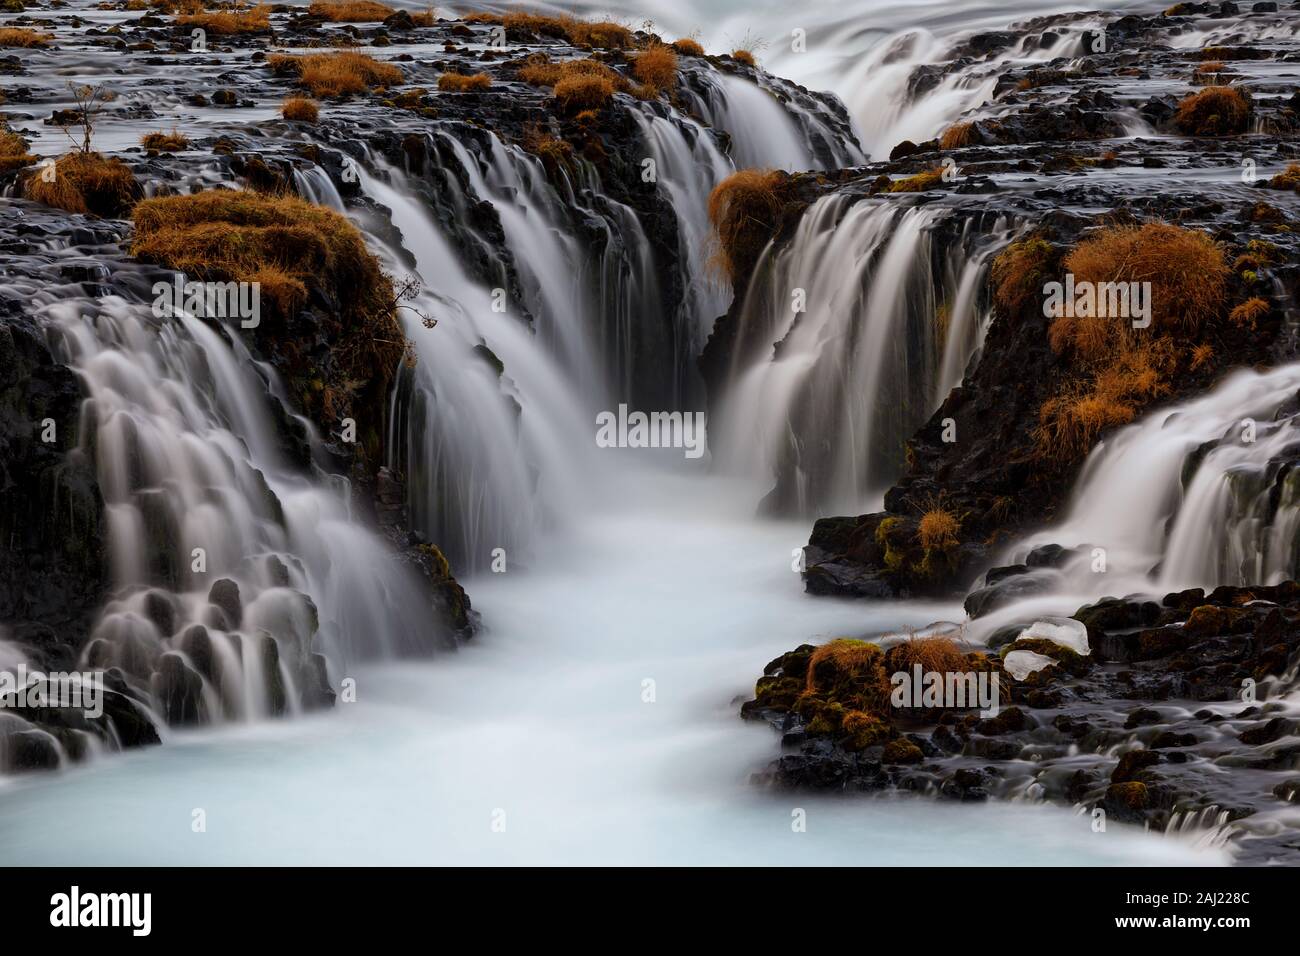 Bruarfoss, a great turquoise waterfall in Iceland Stock Photo